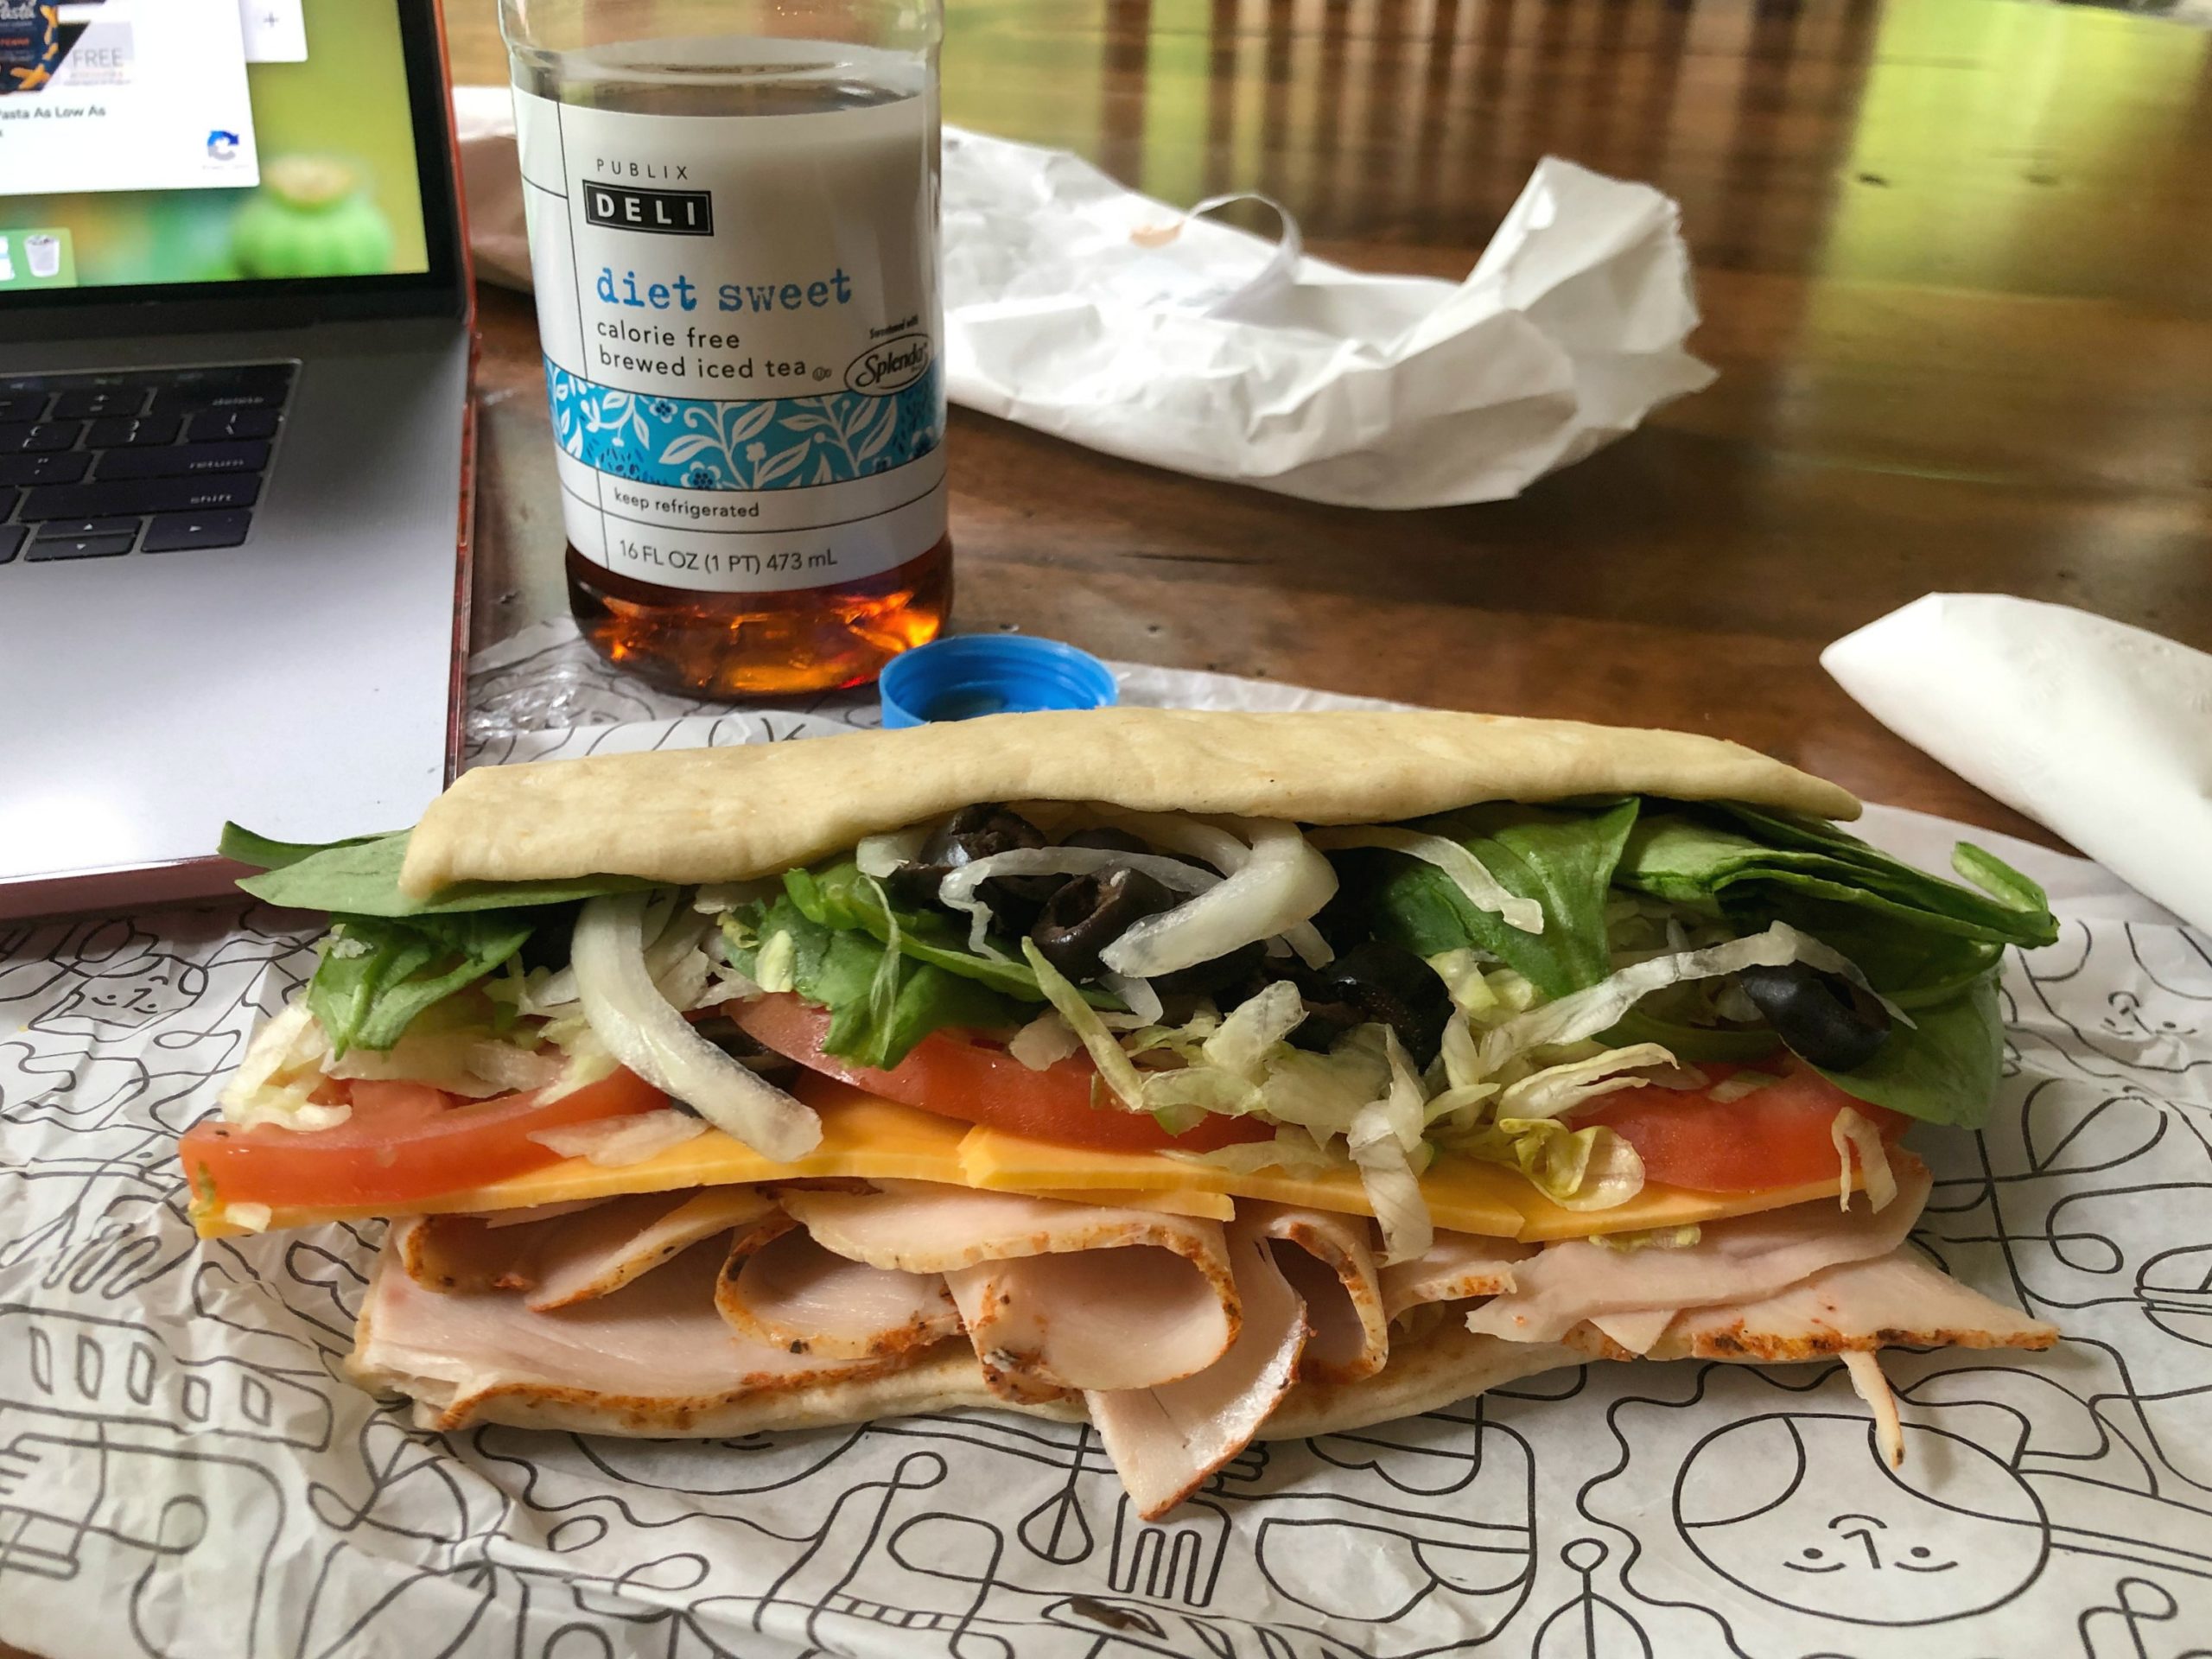 Try A Flatbread Sandwich From The Publix Deli And Roll Up A Softer Sandwich At Lunchtime! on I Heart Publix 2